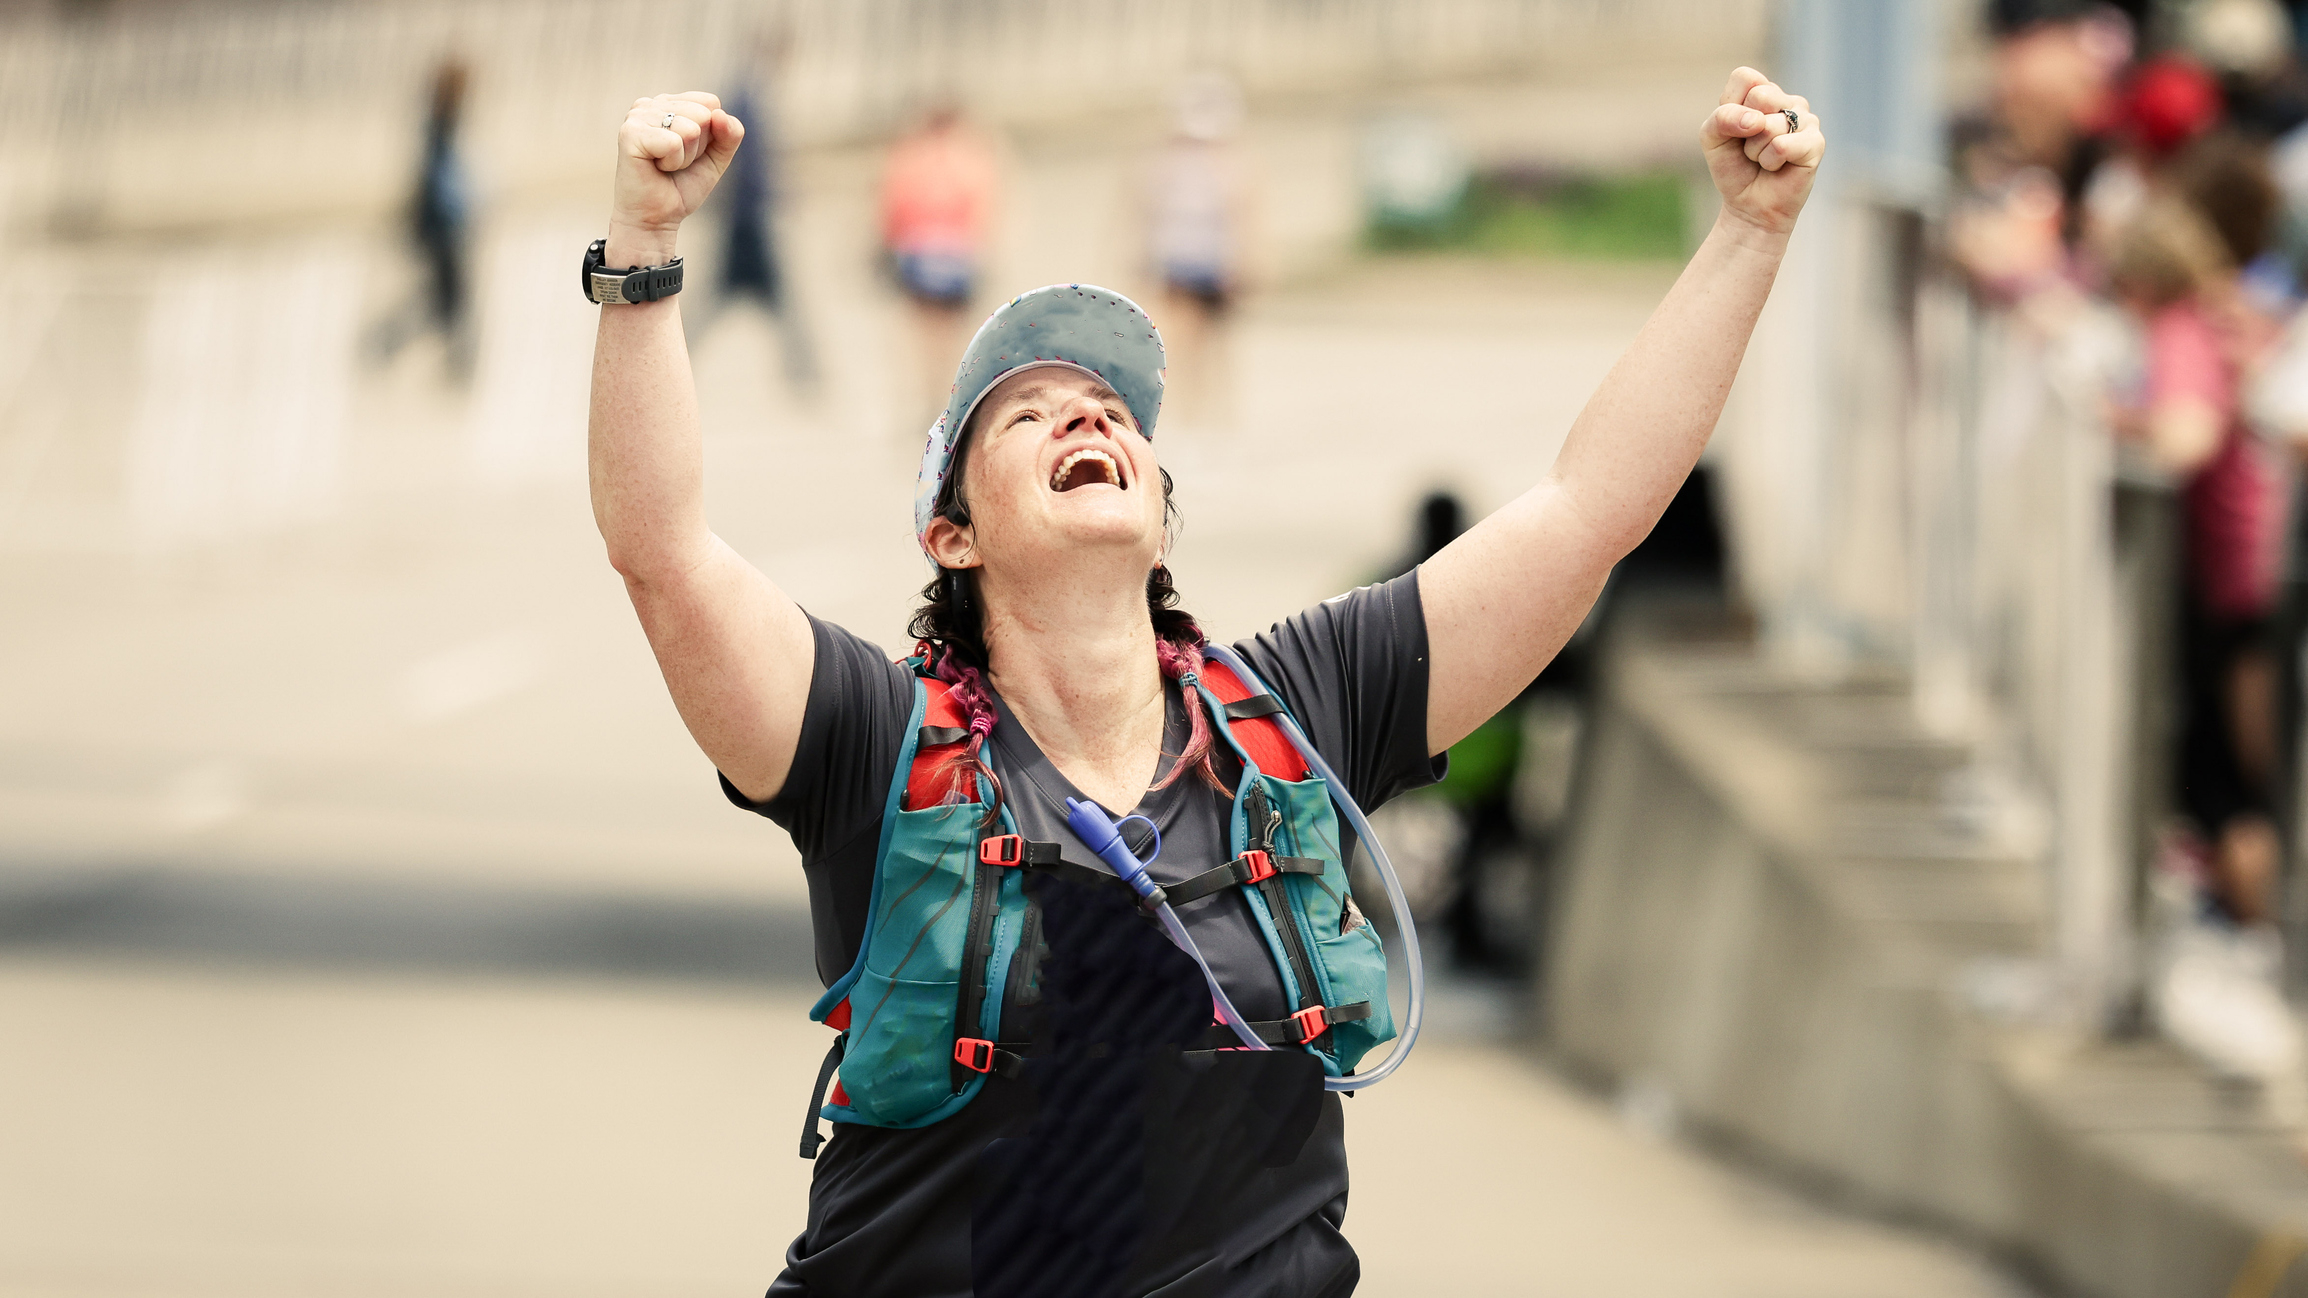 Person celebrating with raised arms, wearing a cap and a backpack